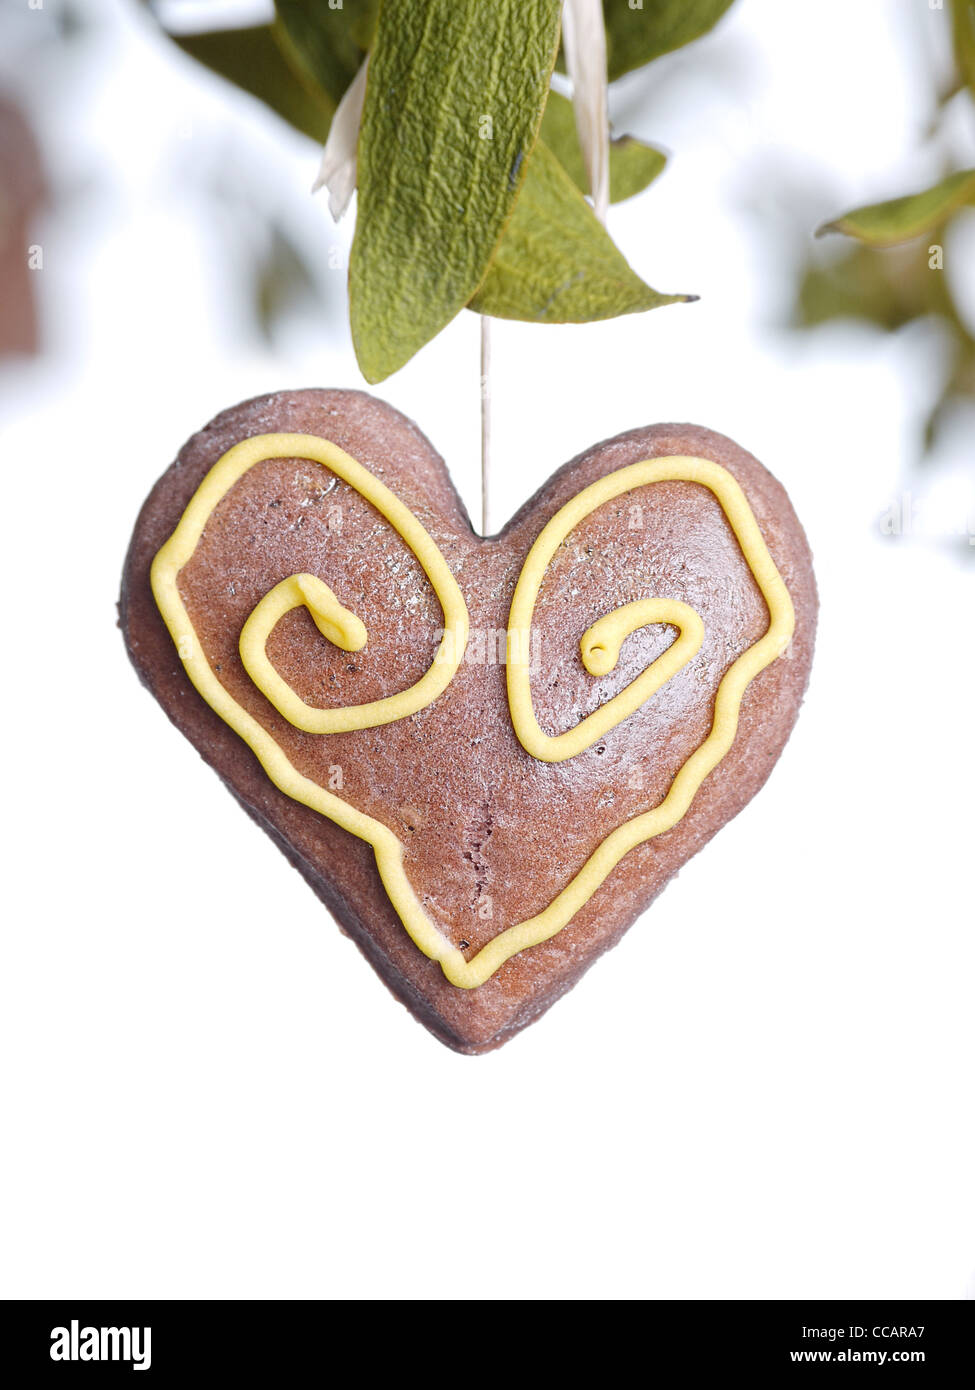 Mistletoe with brown gingerbread heart cake on white background Stock Photo